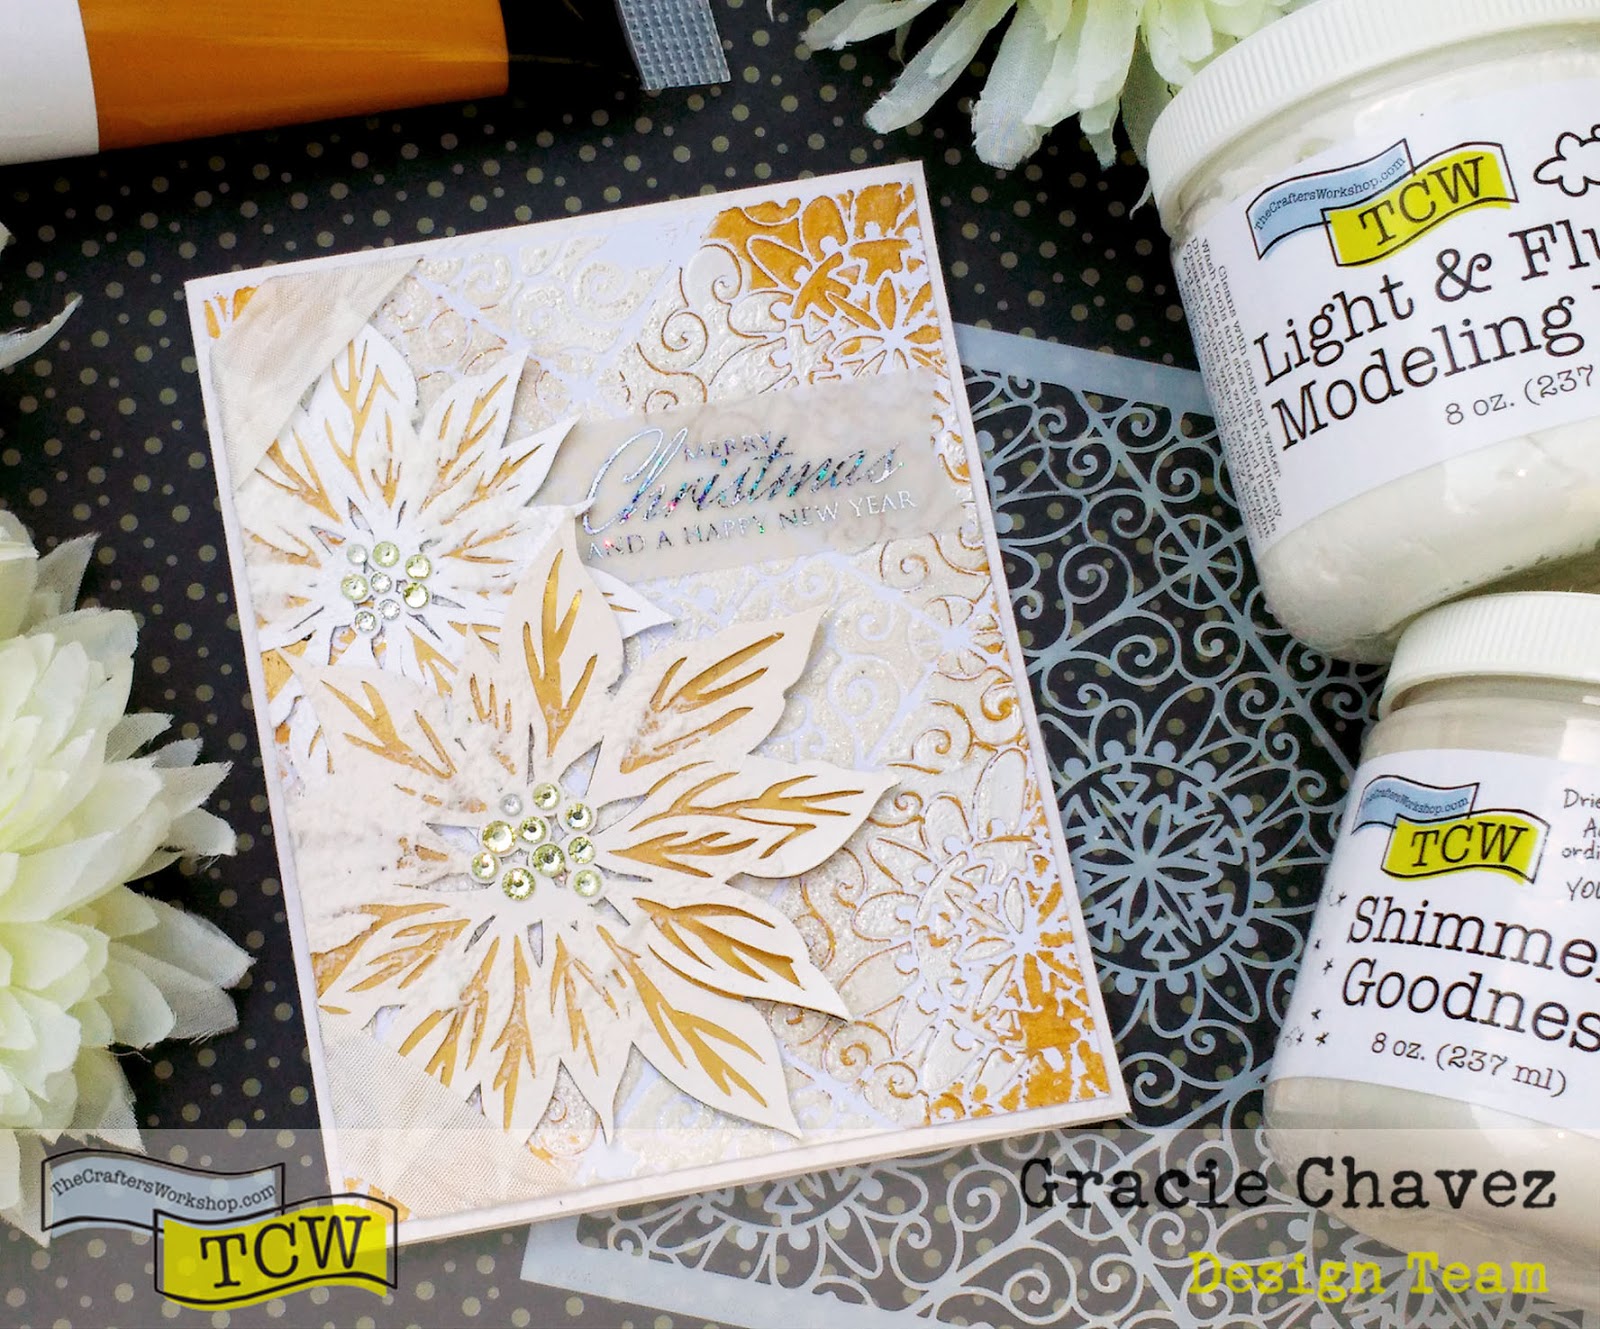 Adding Snow Texture to your Christmas Cards with Modeling Paste –  Graciellie Design